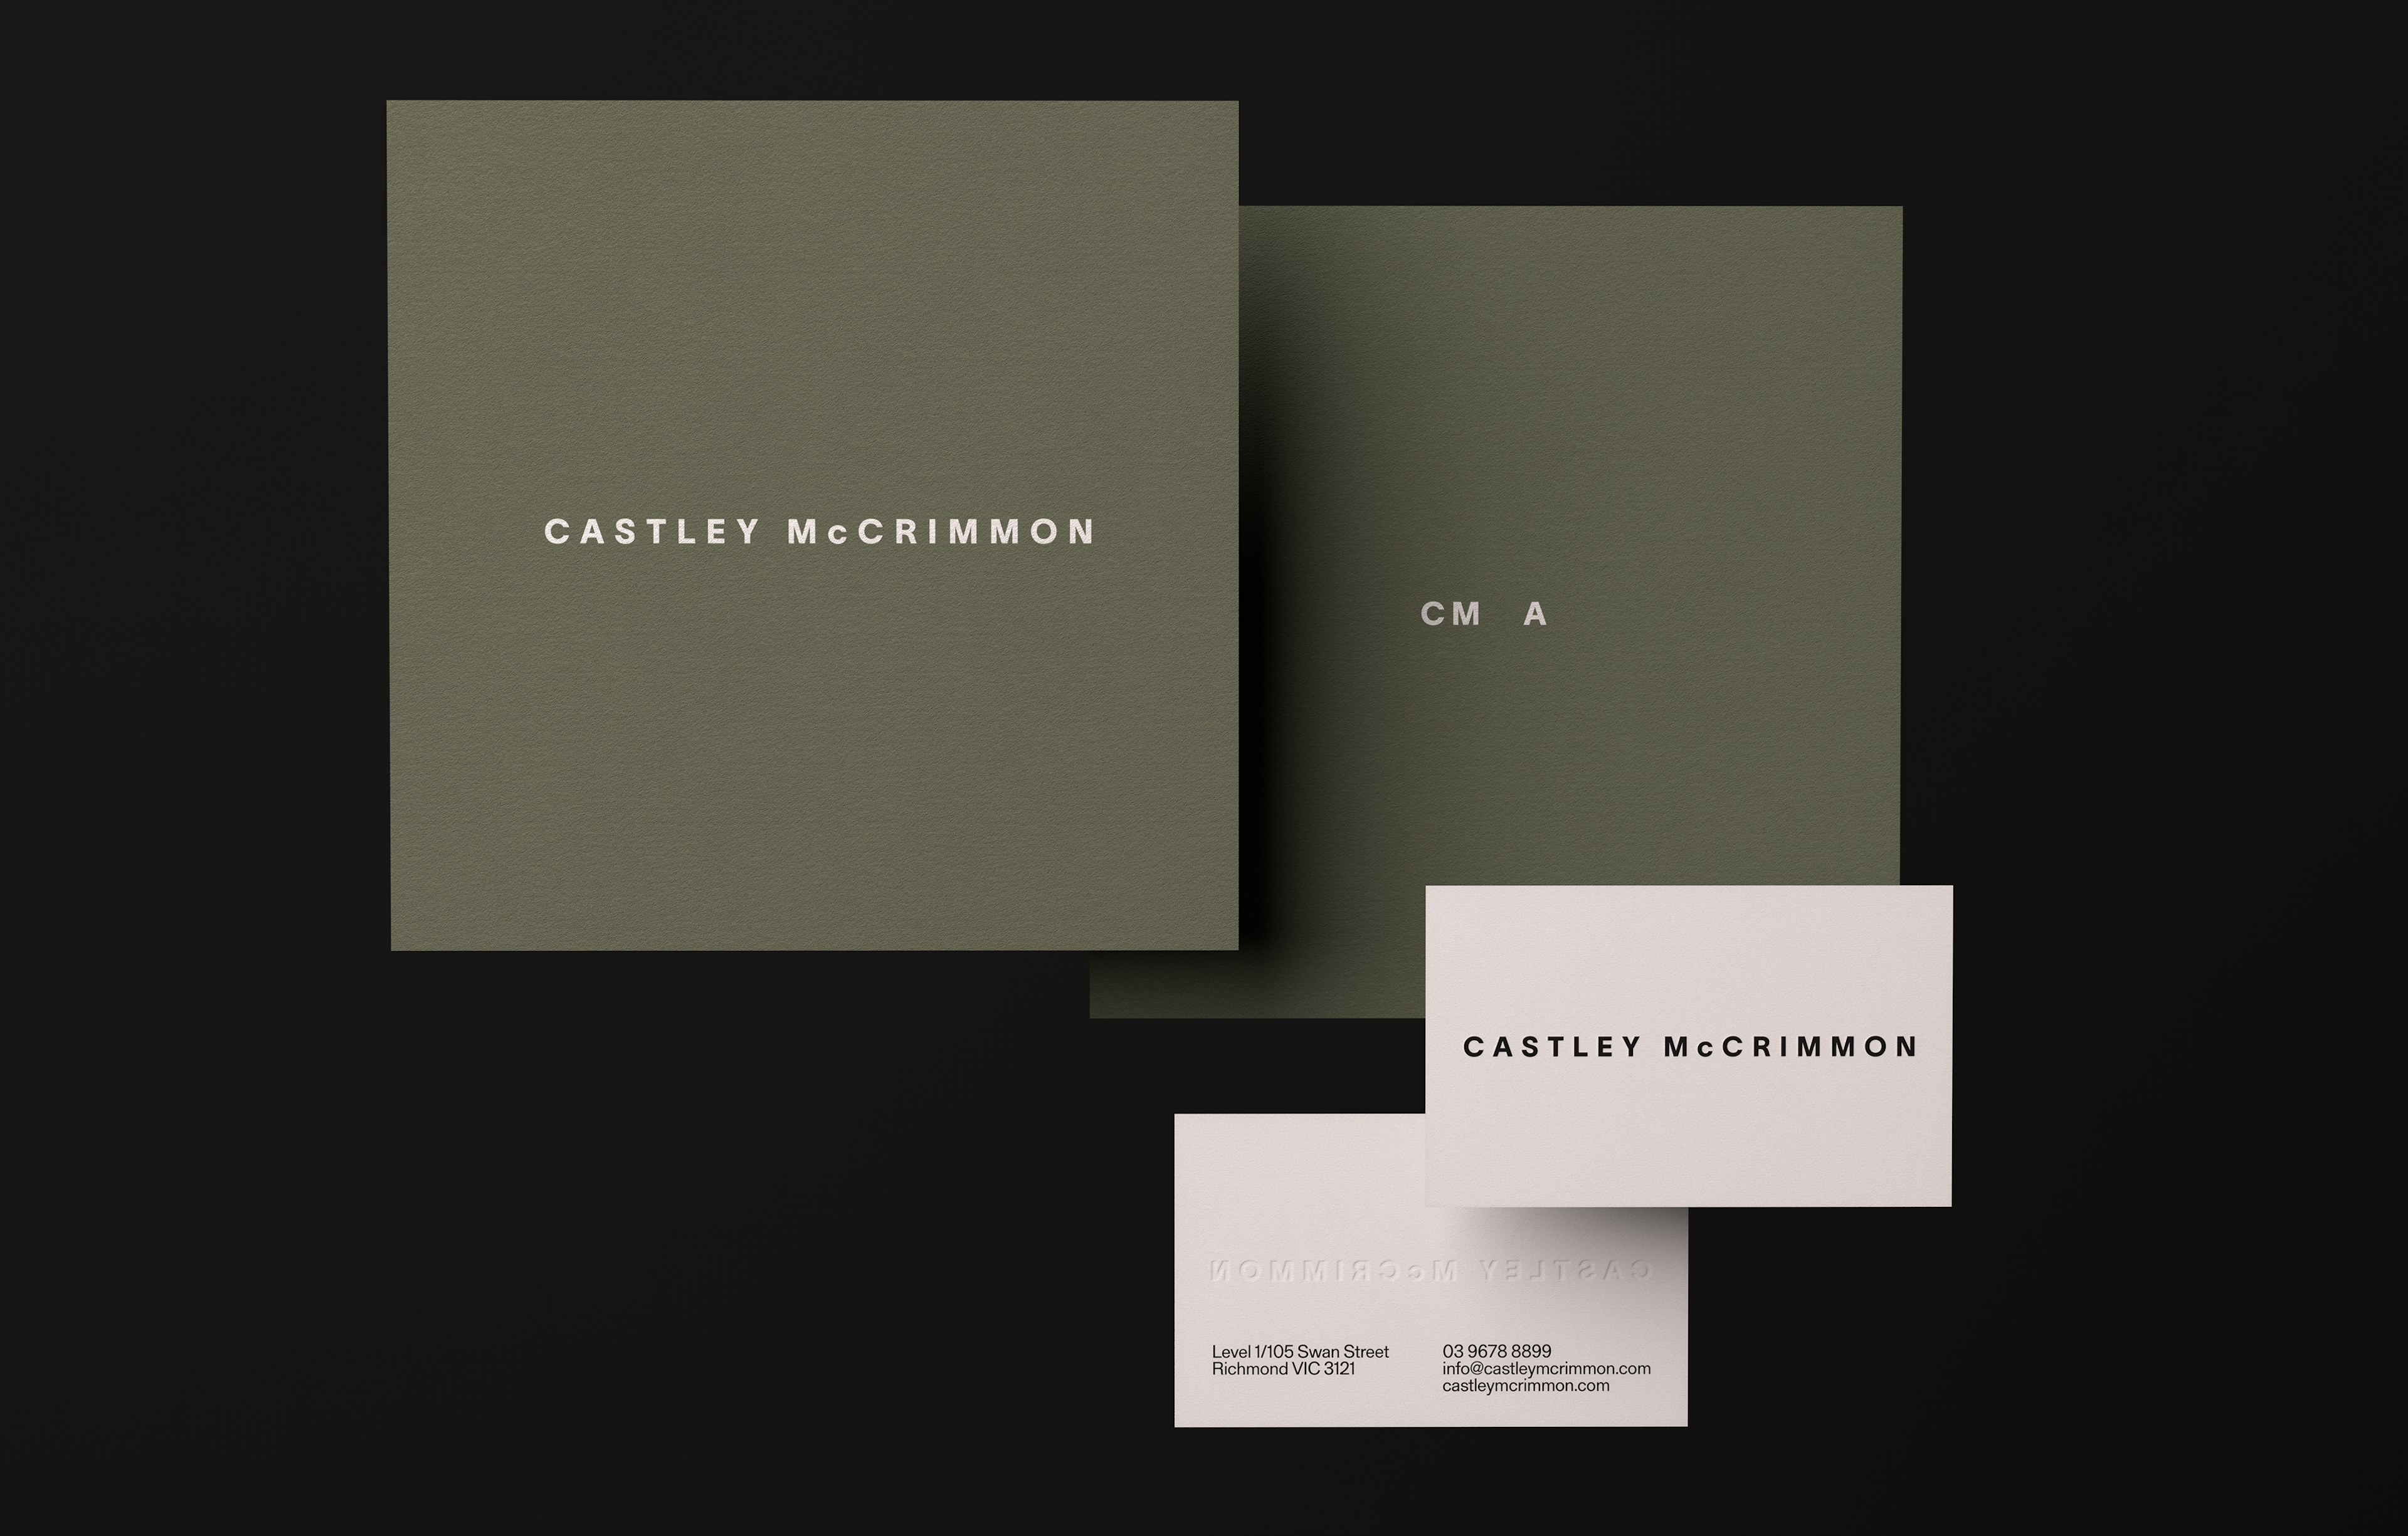 Castley McCrimmon collateral by Alter